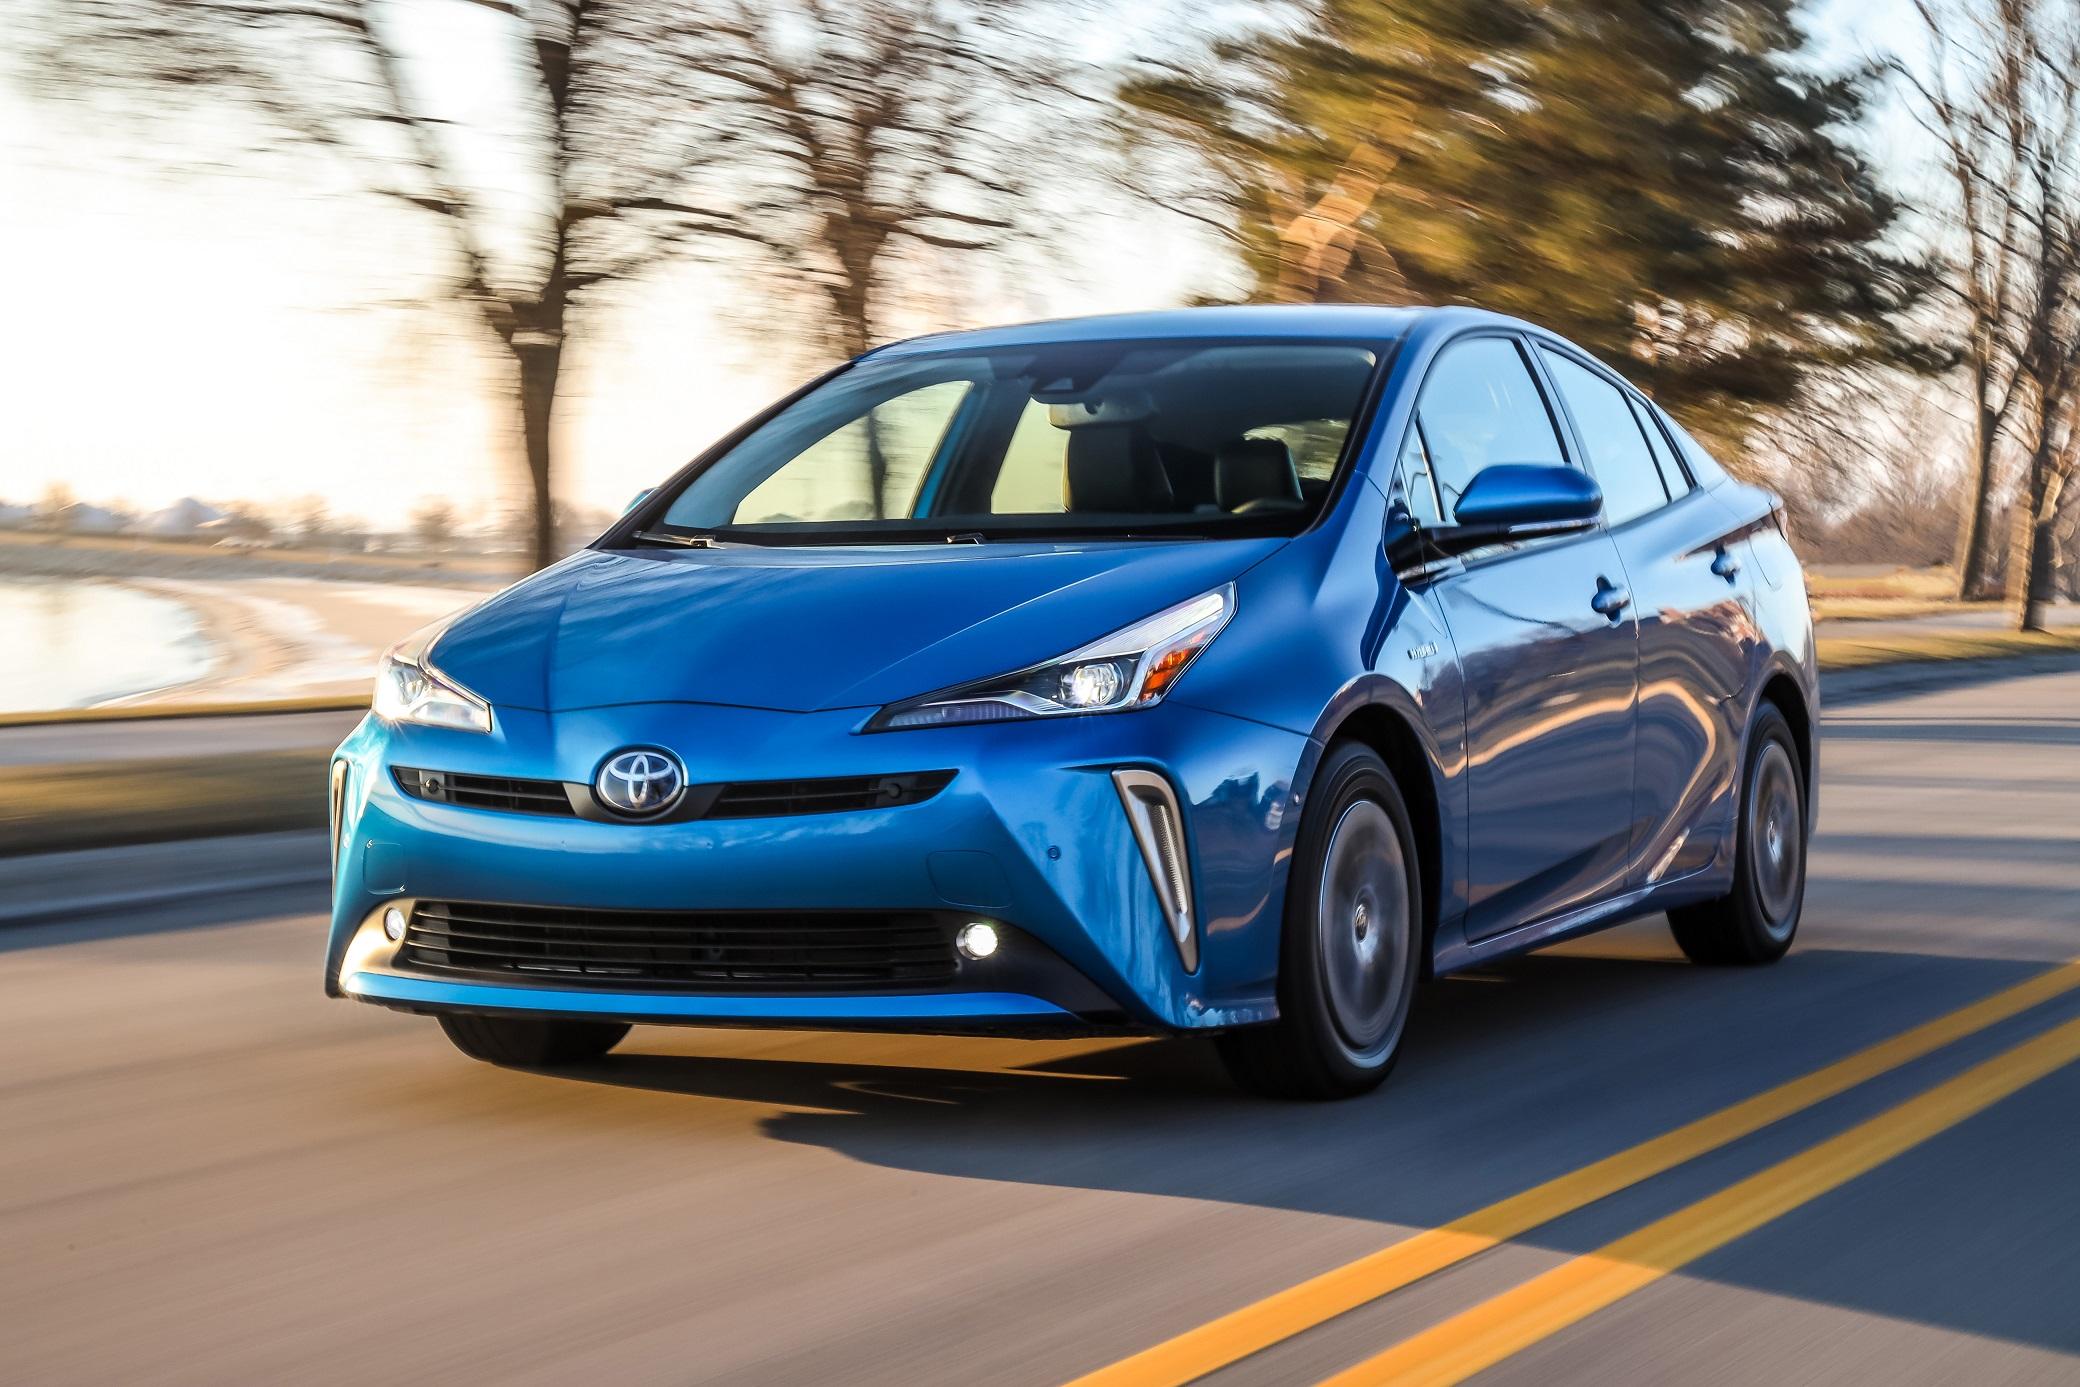 The Toyota Prius C didn’t attract enough sales to stick around.